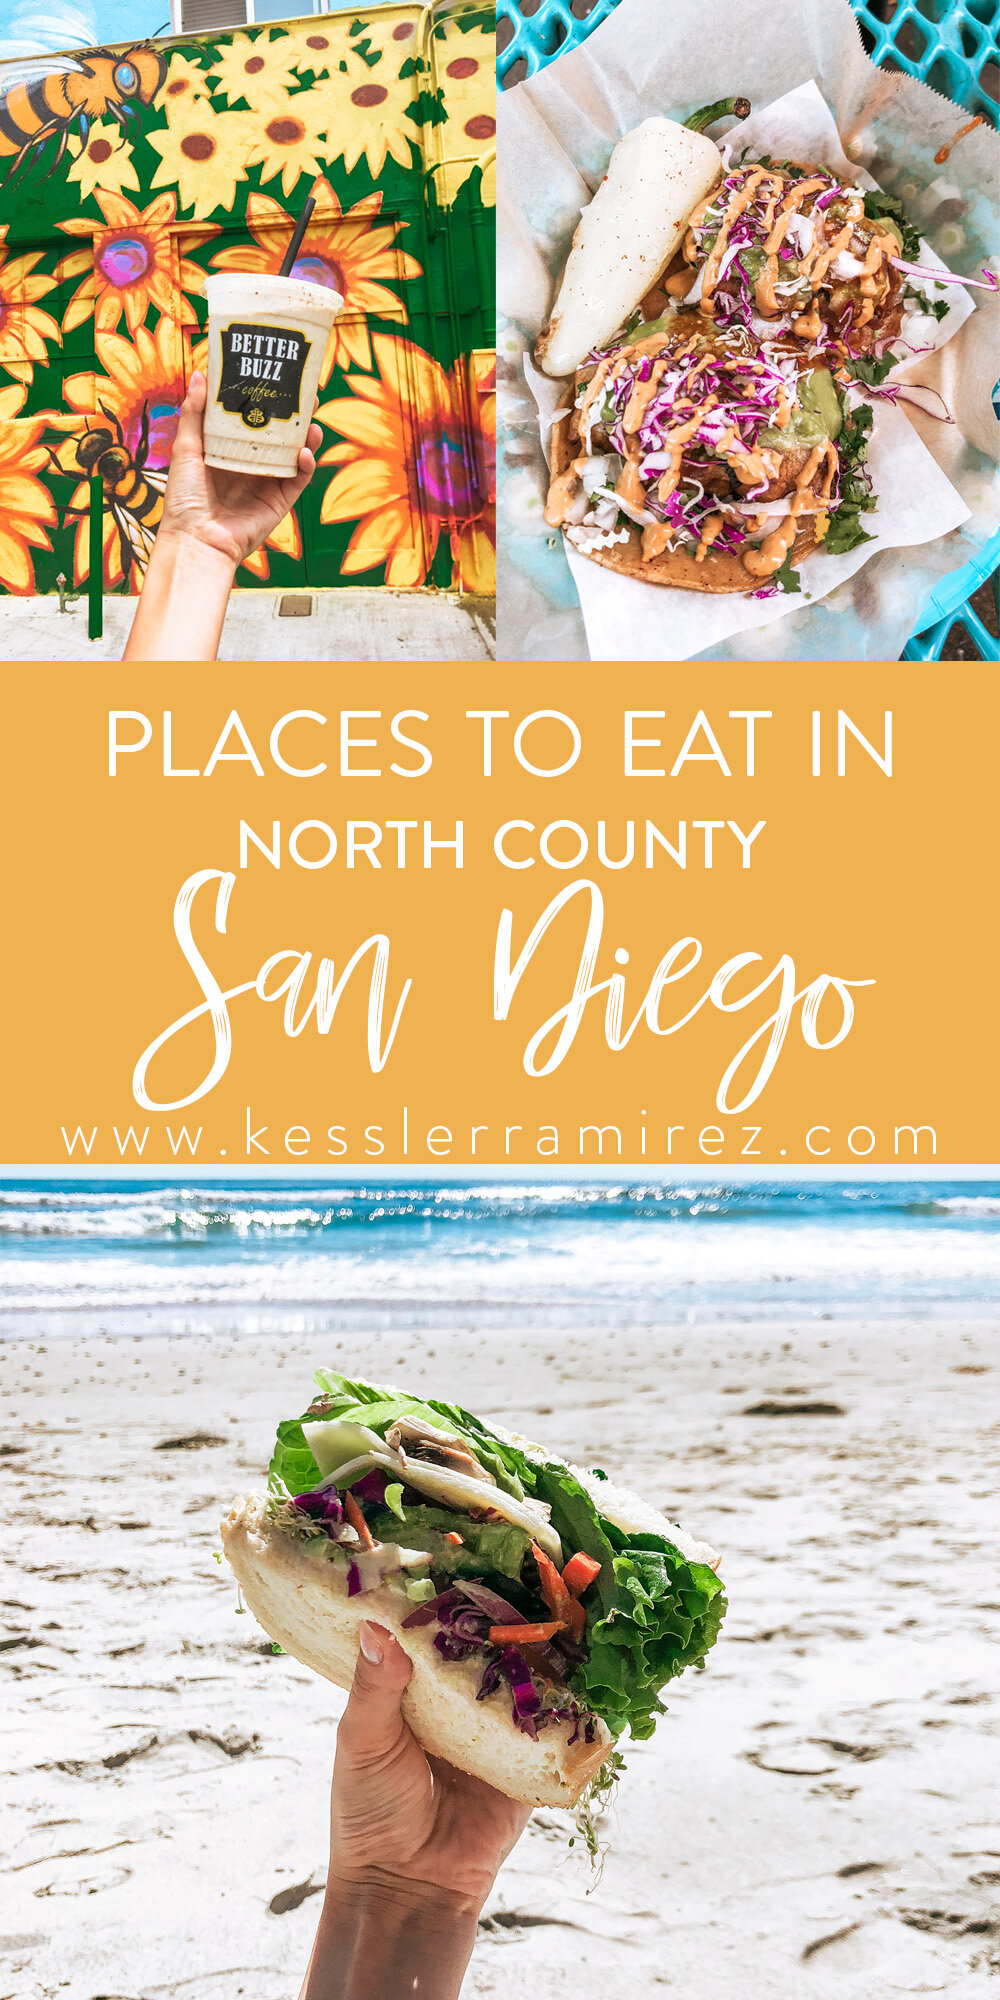 19 Places to Eat in North County San Diego | Kessler Ramirez Art & Travel